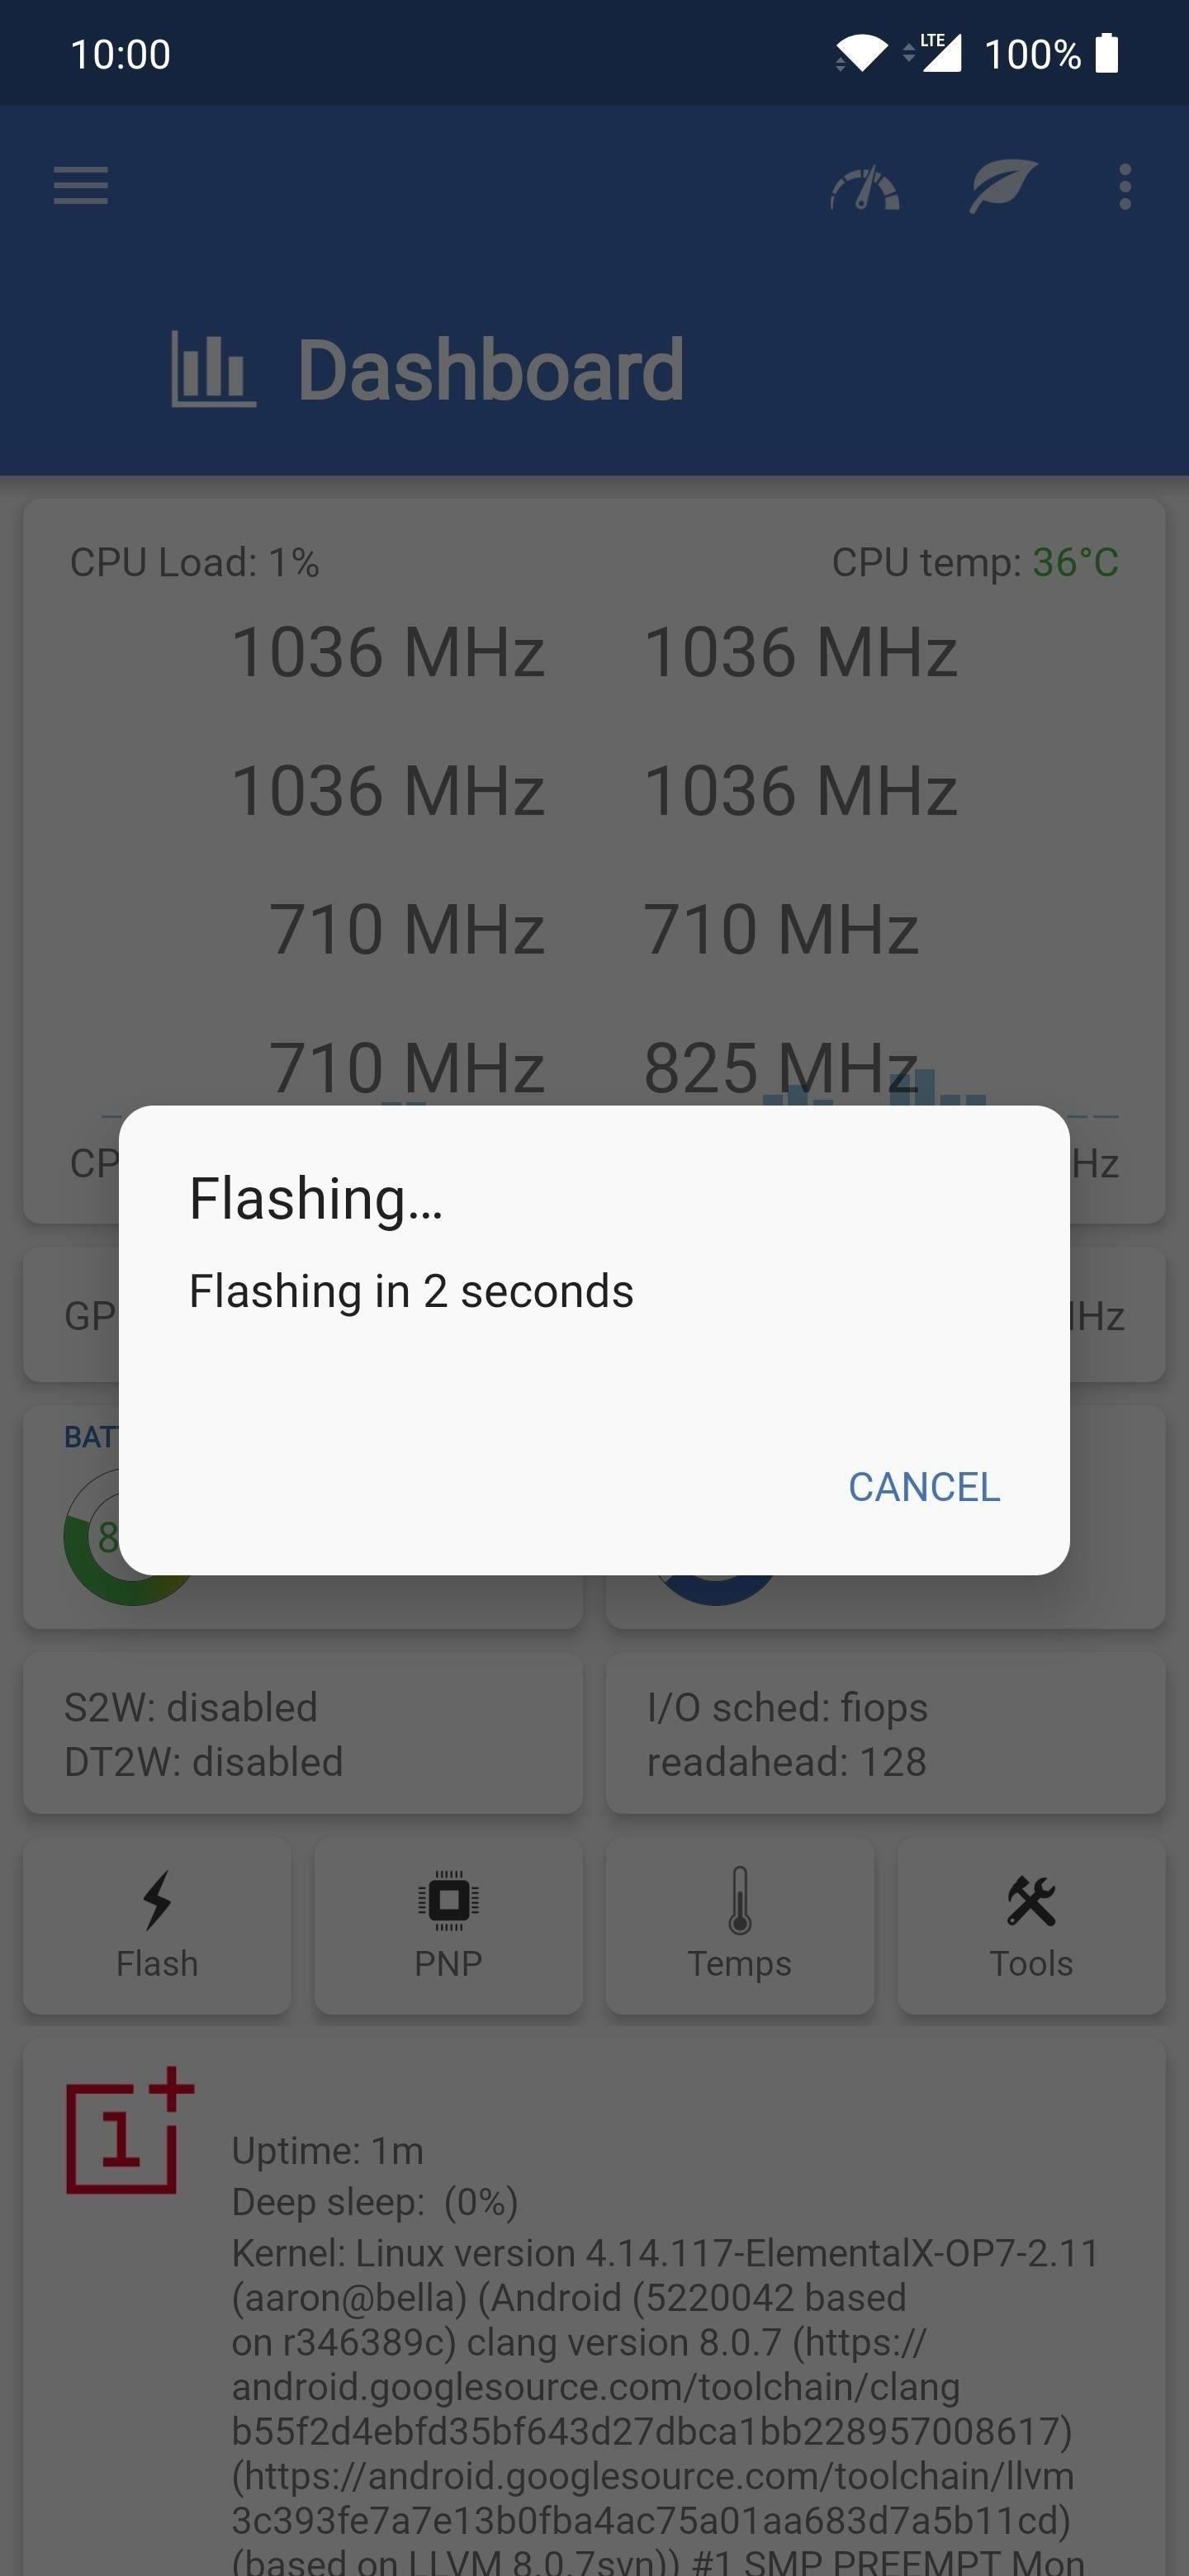 How to Flash ZIPs Without TWRP (Or Any Custom Recovery)